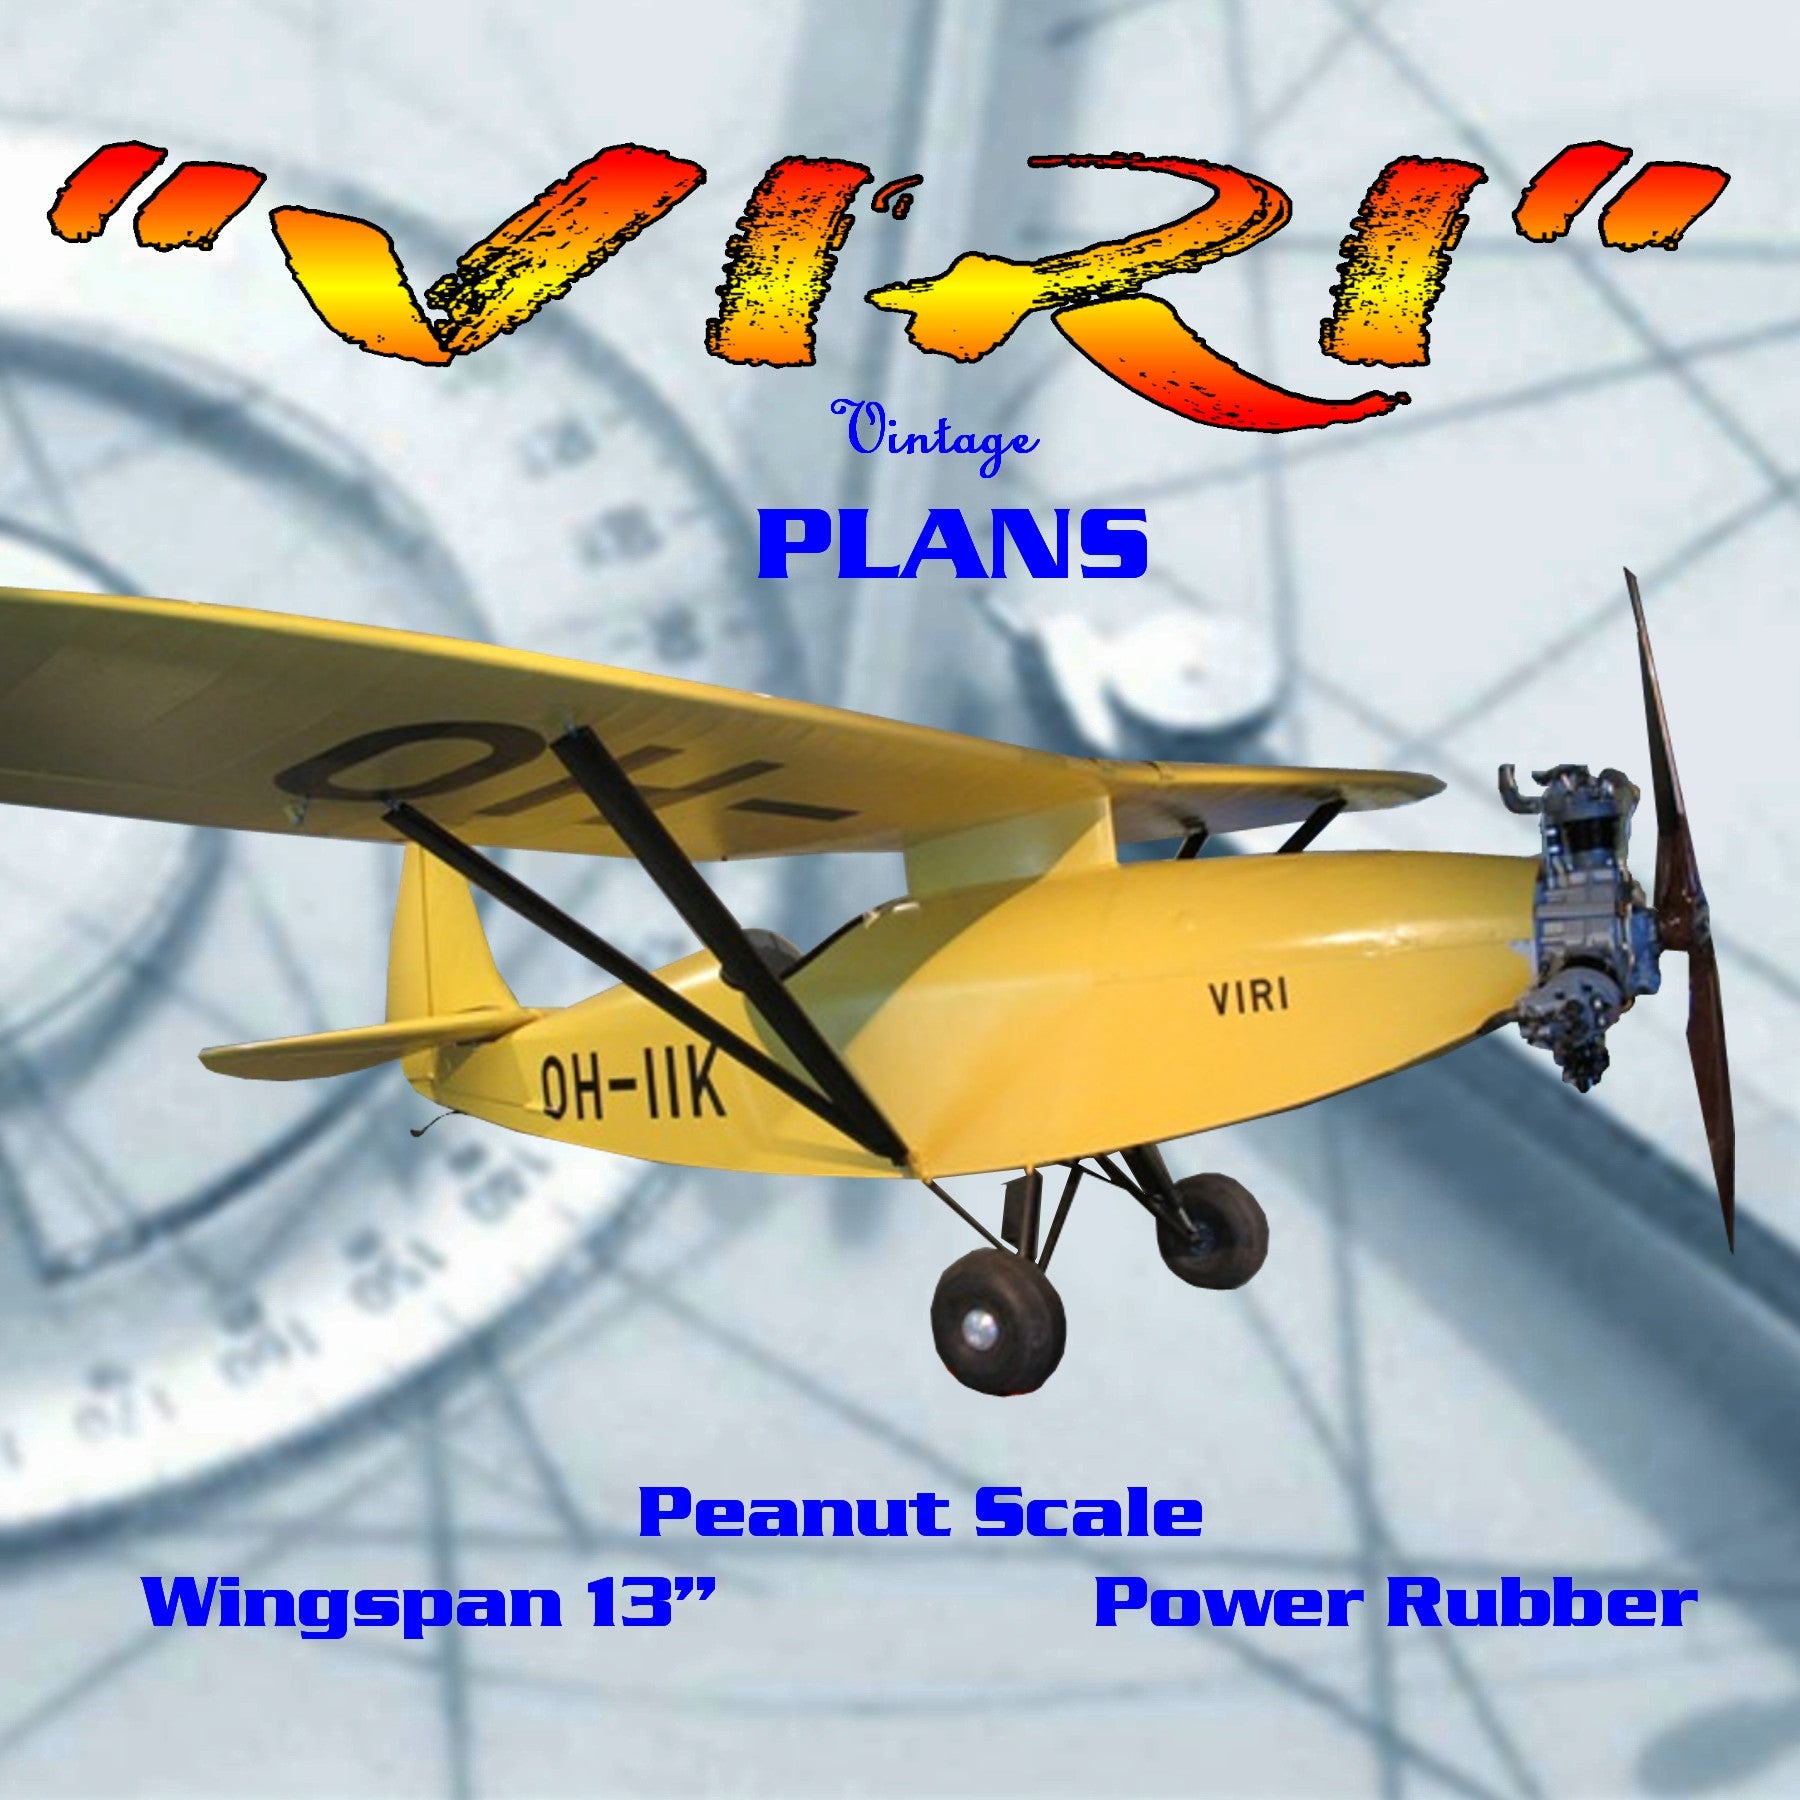 full size printed plans peanut scale "viri" quaint little single-seater from the 1930s